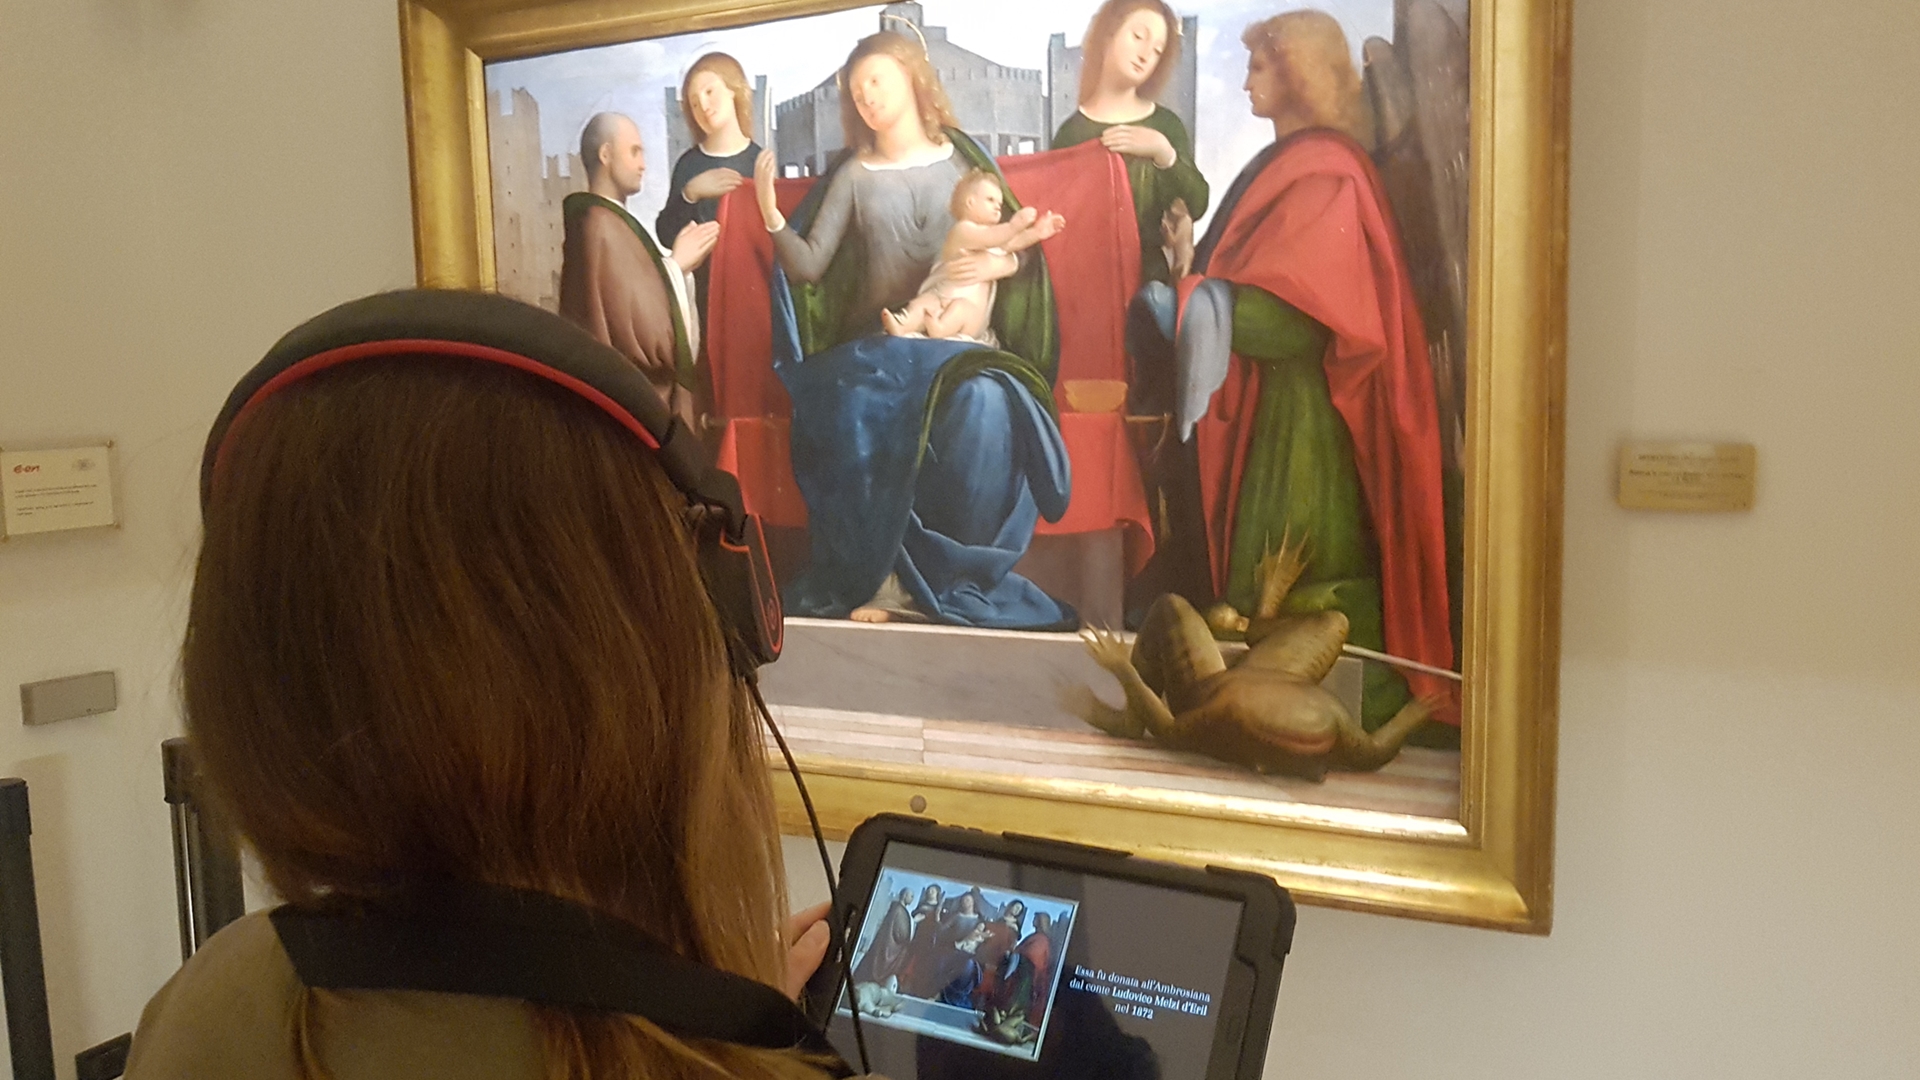 New multimedia guide for the Pinacoteca